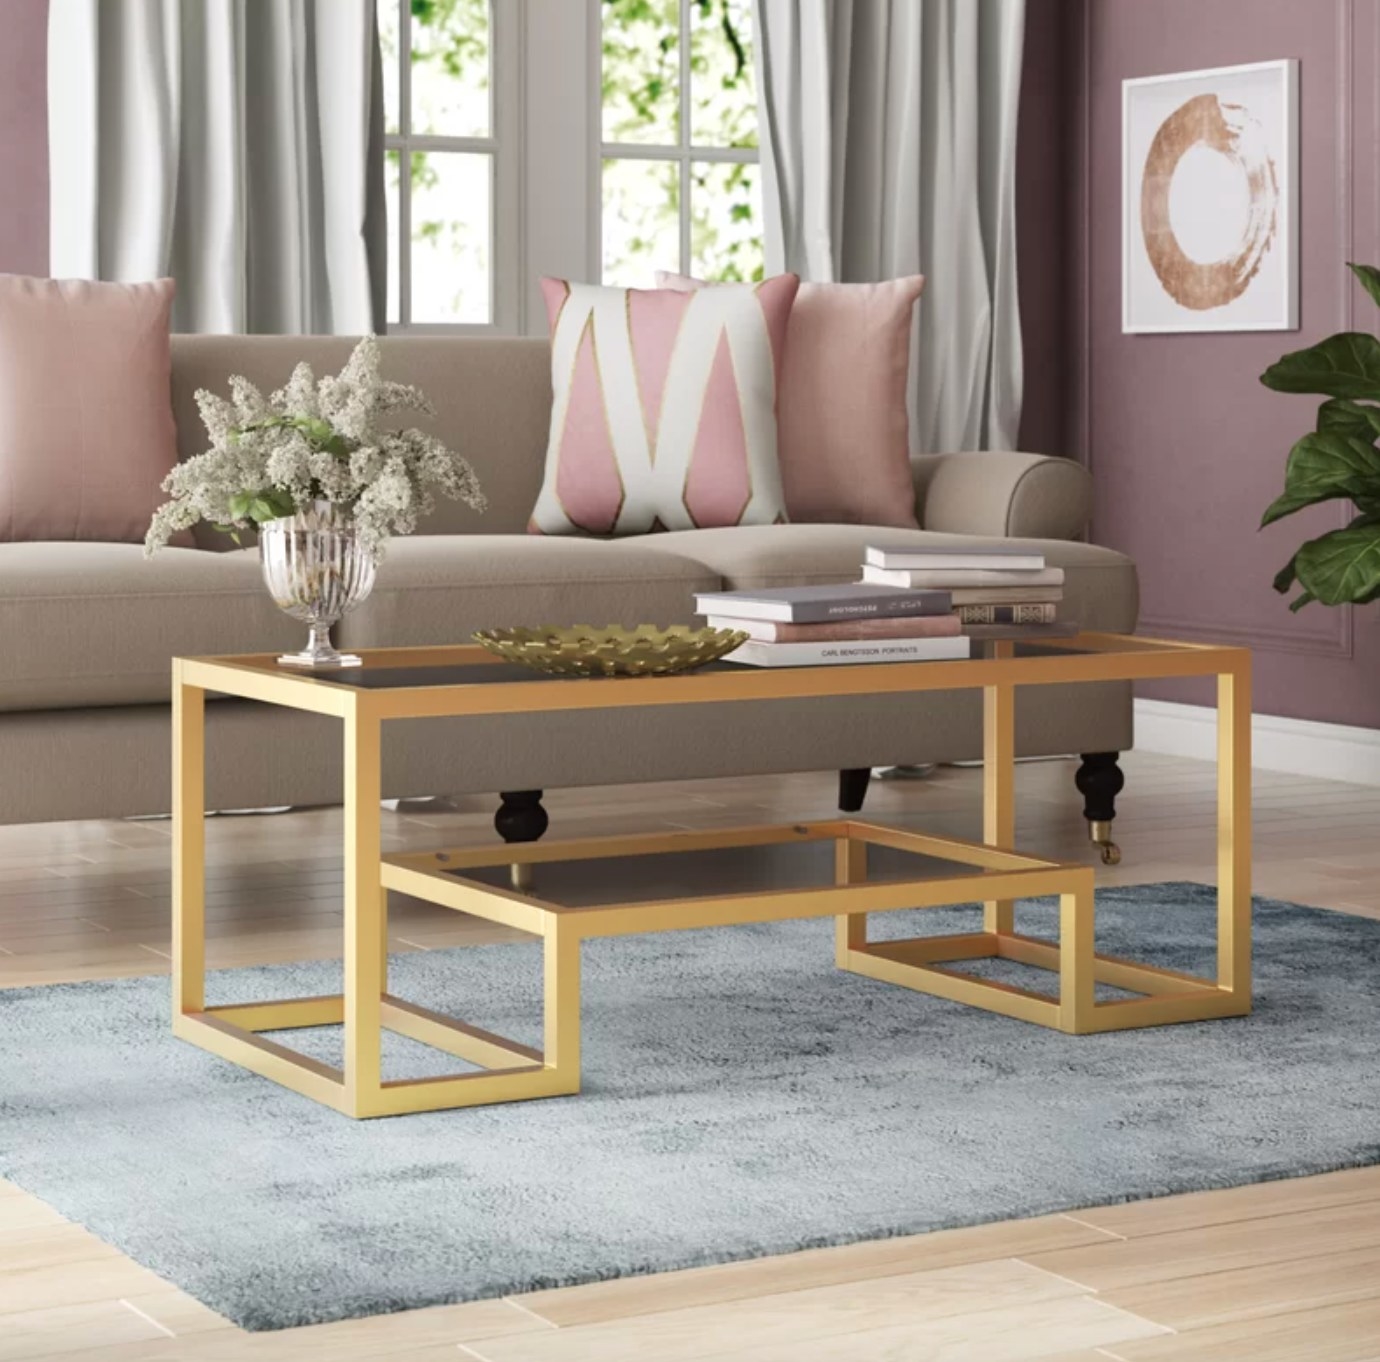 The chic glass and gold coffee table